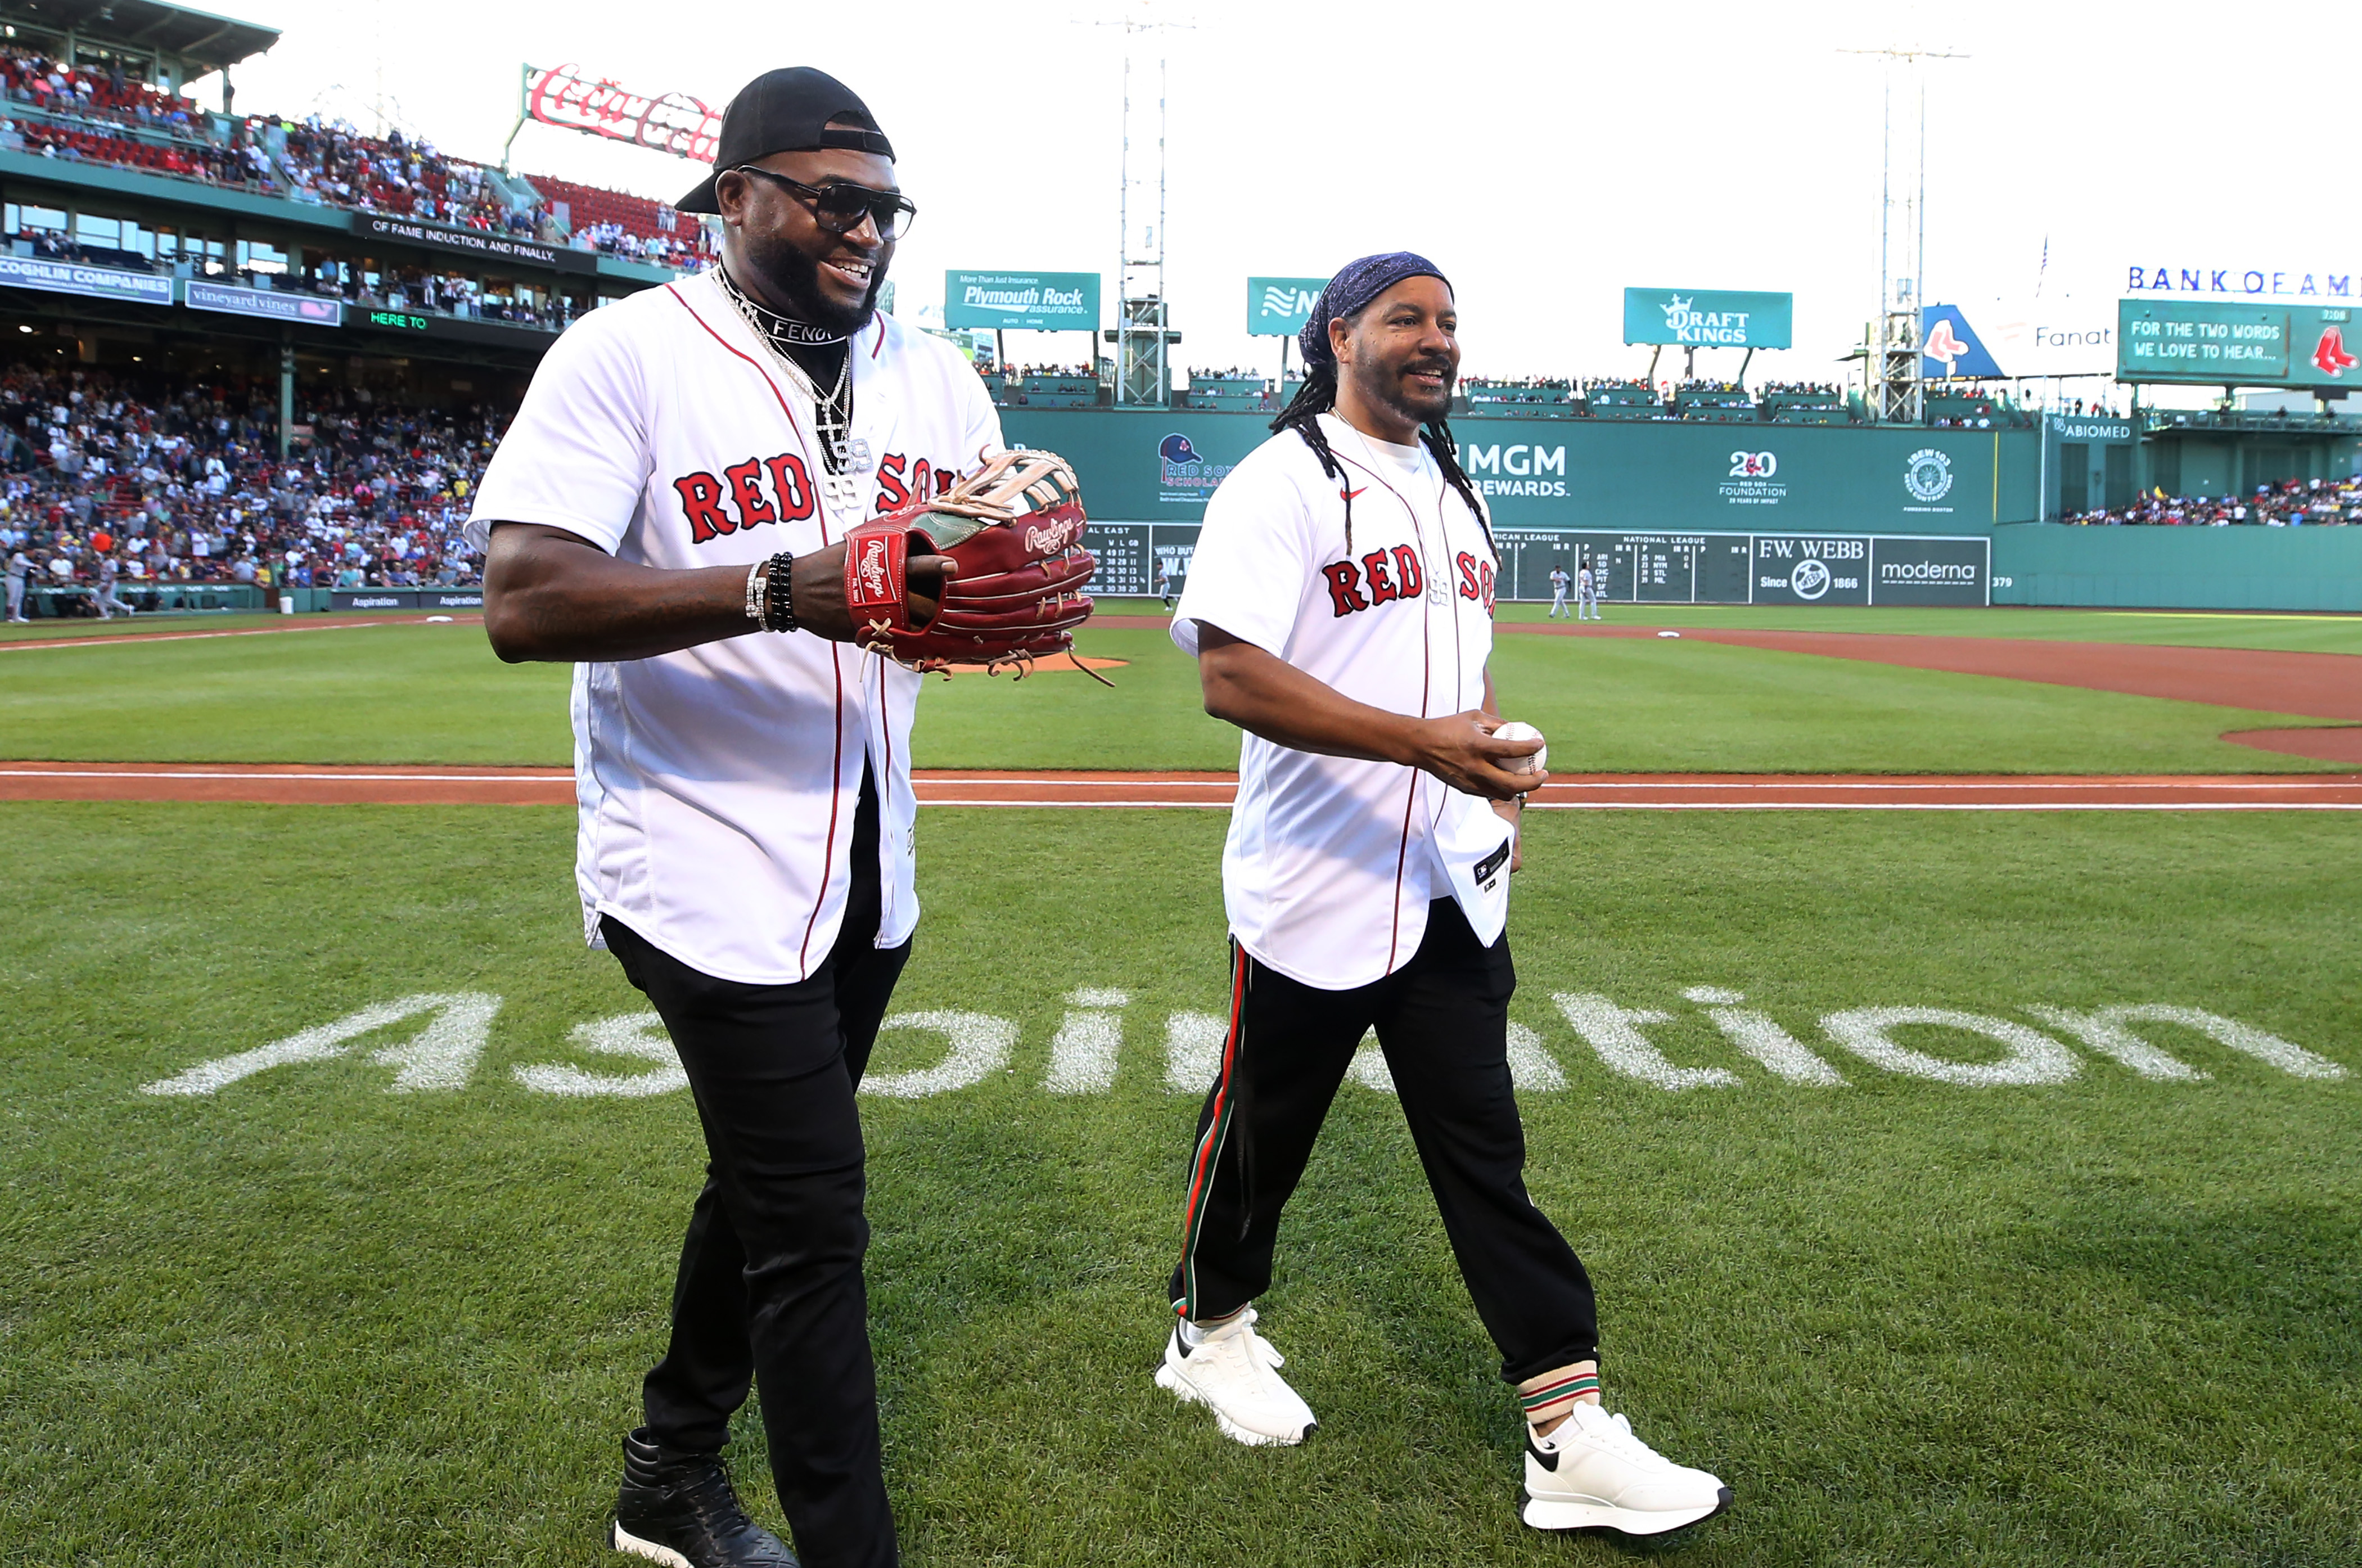 Manny Ramirez returns to face Red Sox at Fenway Park